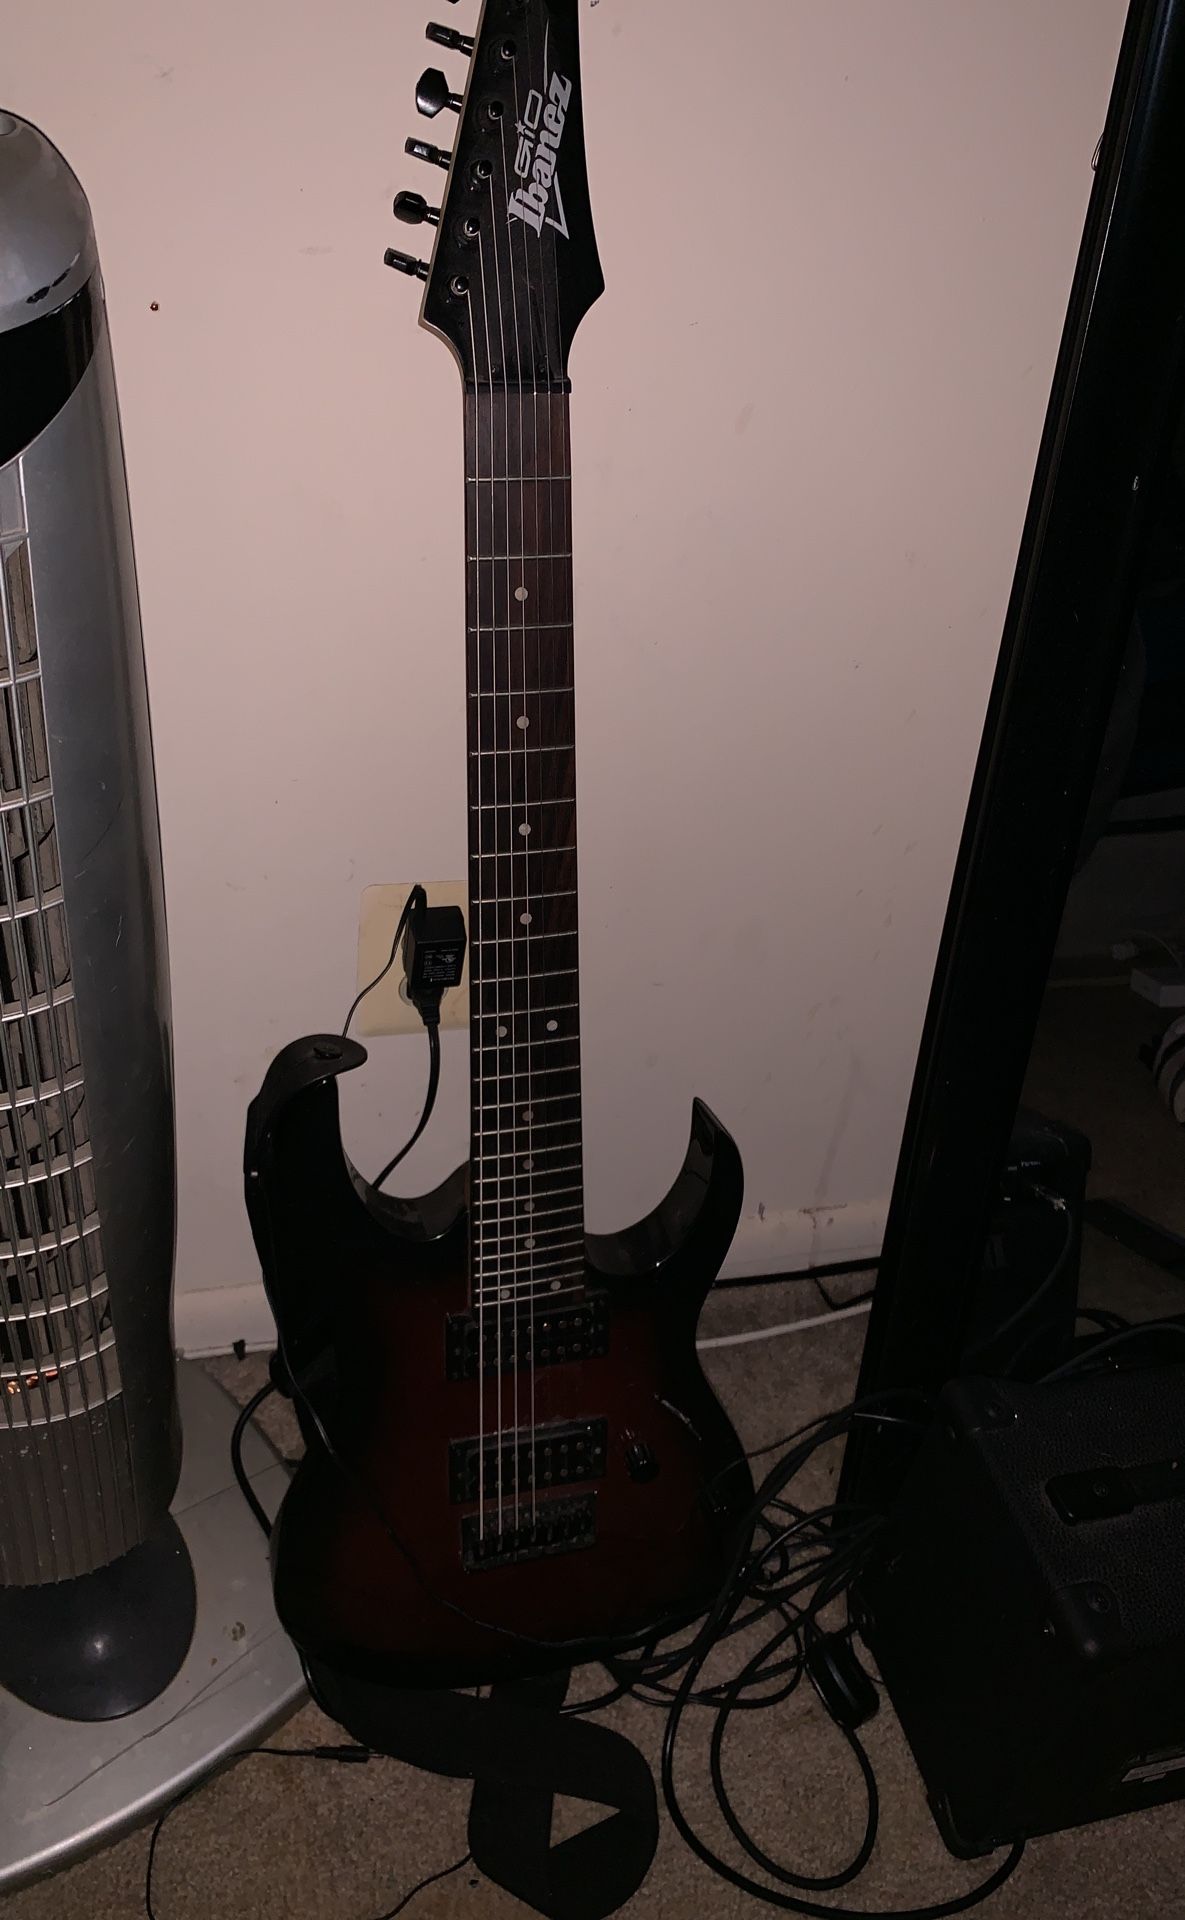 Ibanez grg7221 7 string guitar with amplifier